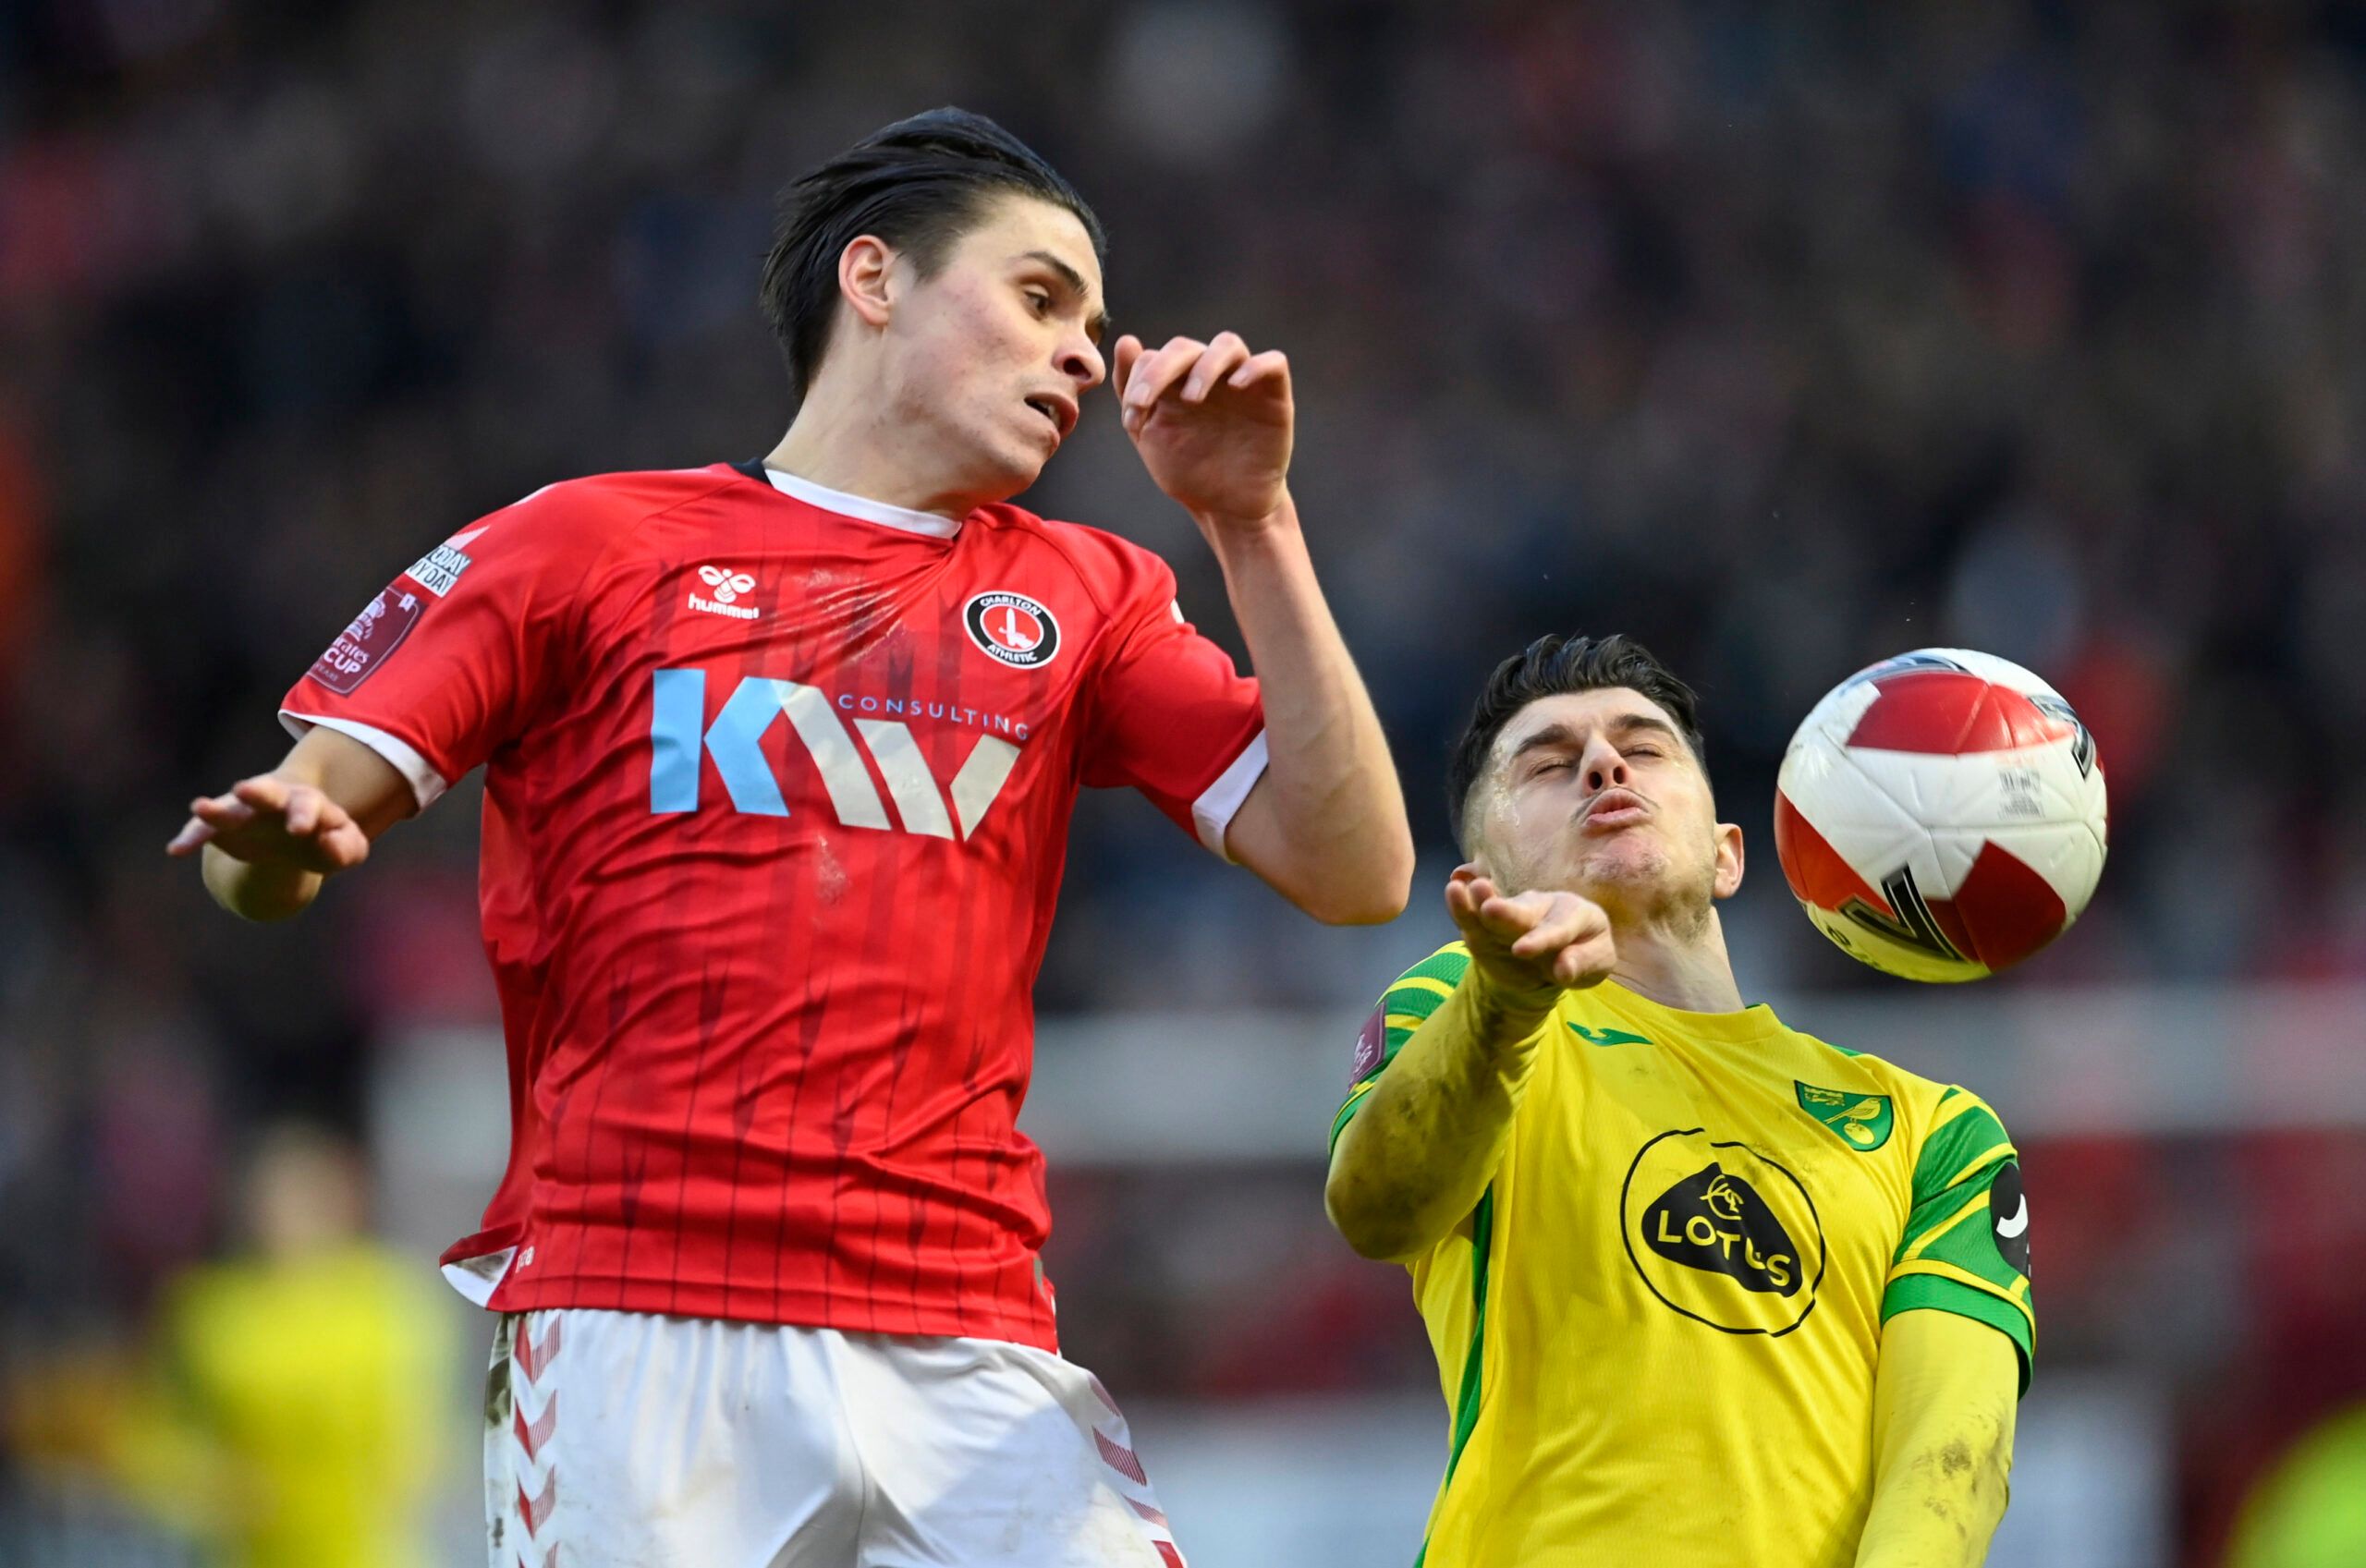 Soccer Football - FA Cup Third Round - Charlton Athletic v Norwich City - The Valley, London, Britain - January 9, 2022 Charlton Athletic's George Dobson in action with Norwich City's Milot Rashica REUTERS/Tony Obrien